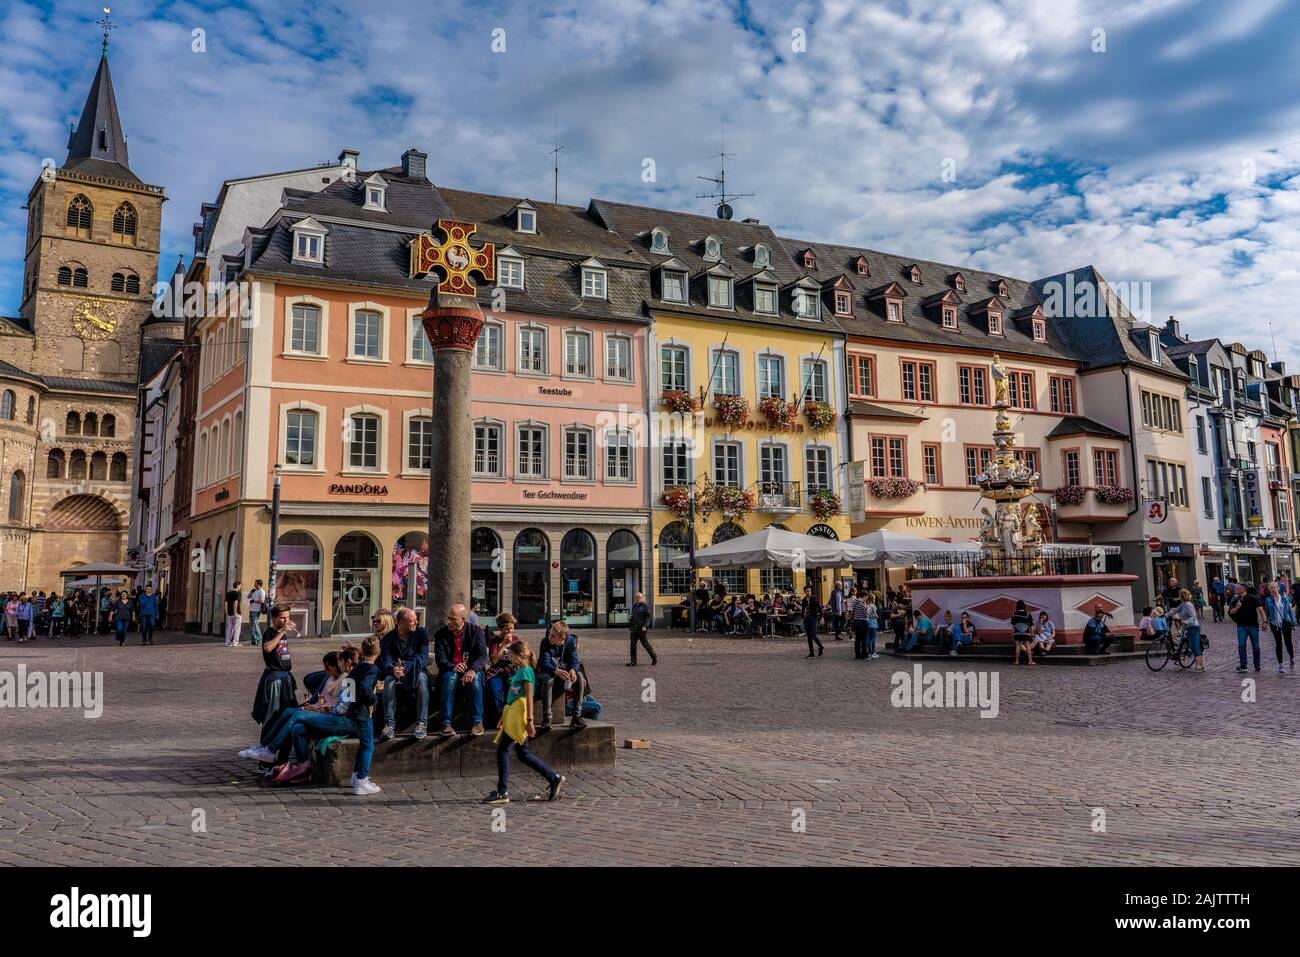 Oldest City In Germany High Resolution Stock Photography and Images - Alamy